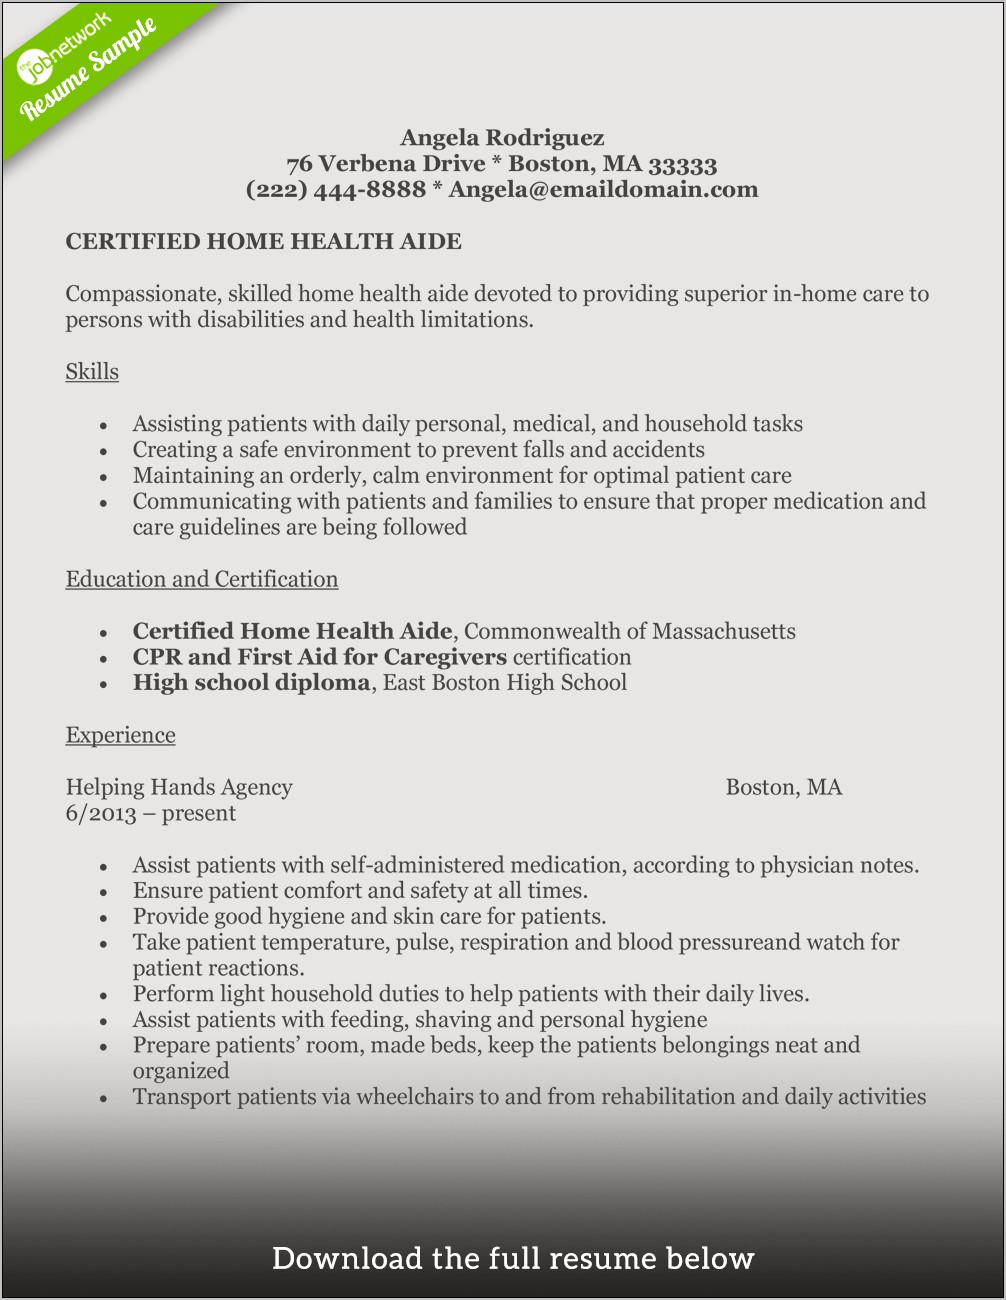 Resume Summary Statement For Home Health Aide